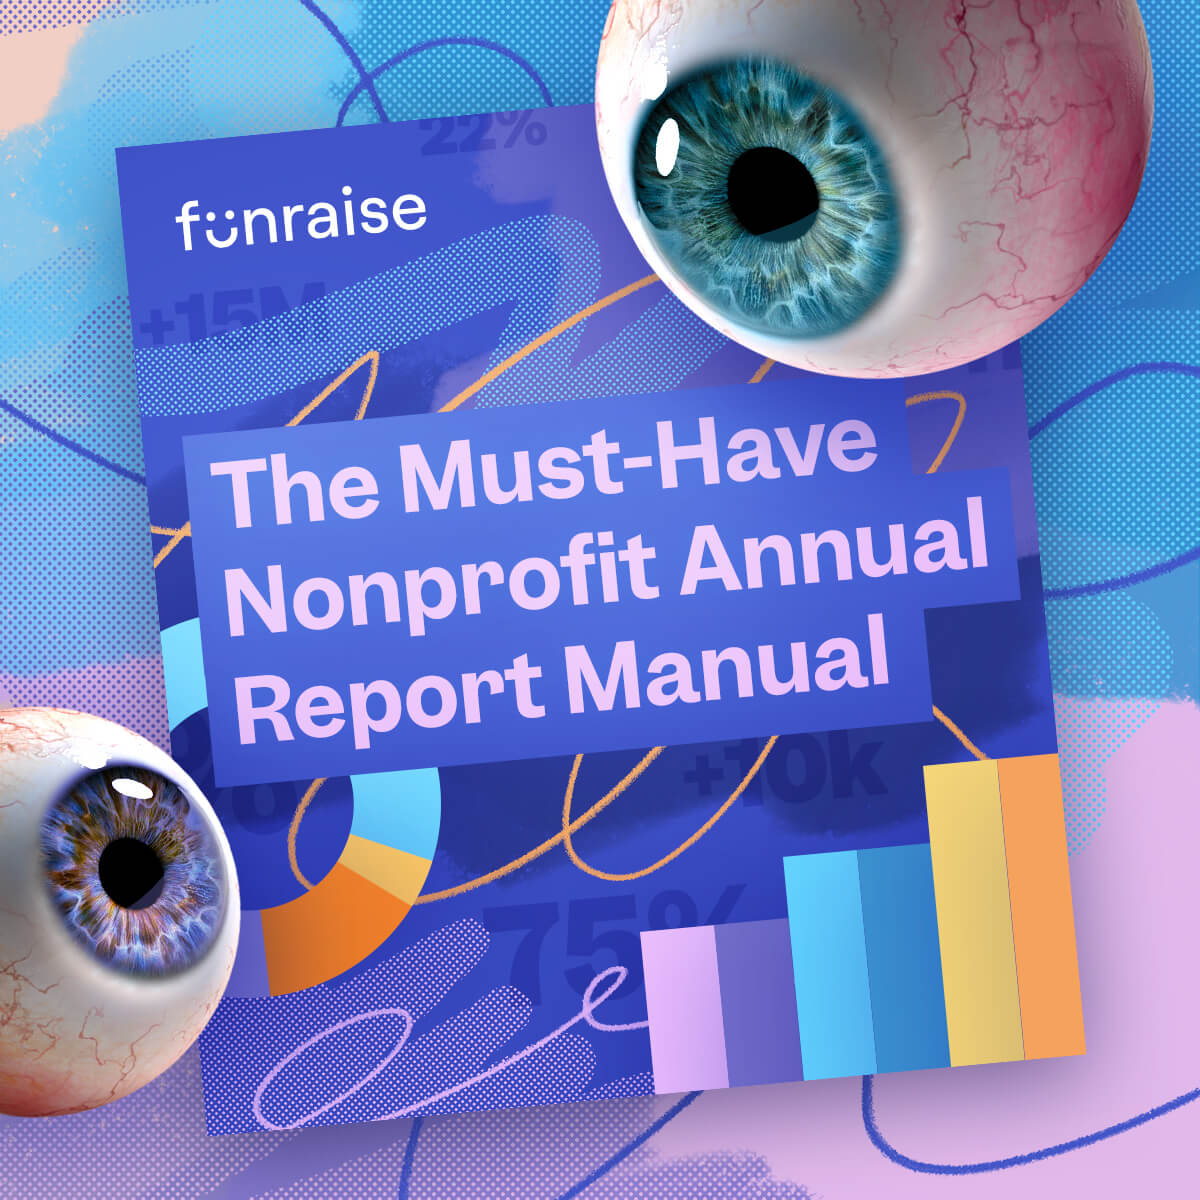 Sponsored social feed post for the Nonprofit Annual Report Manual